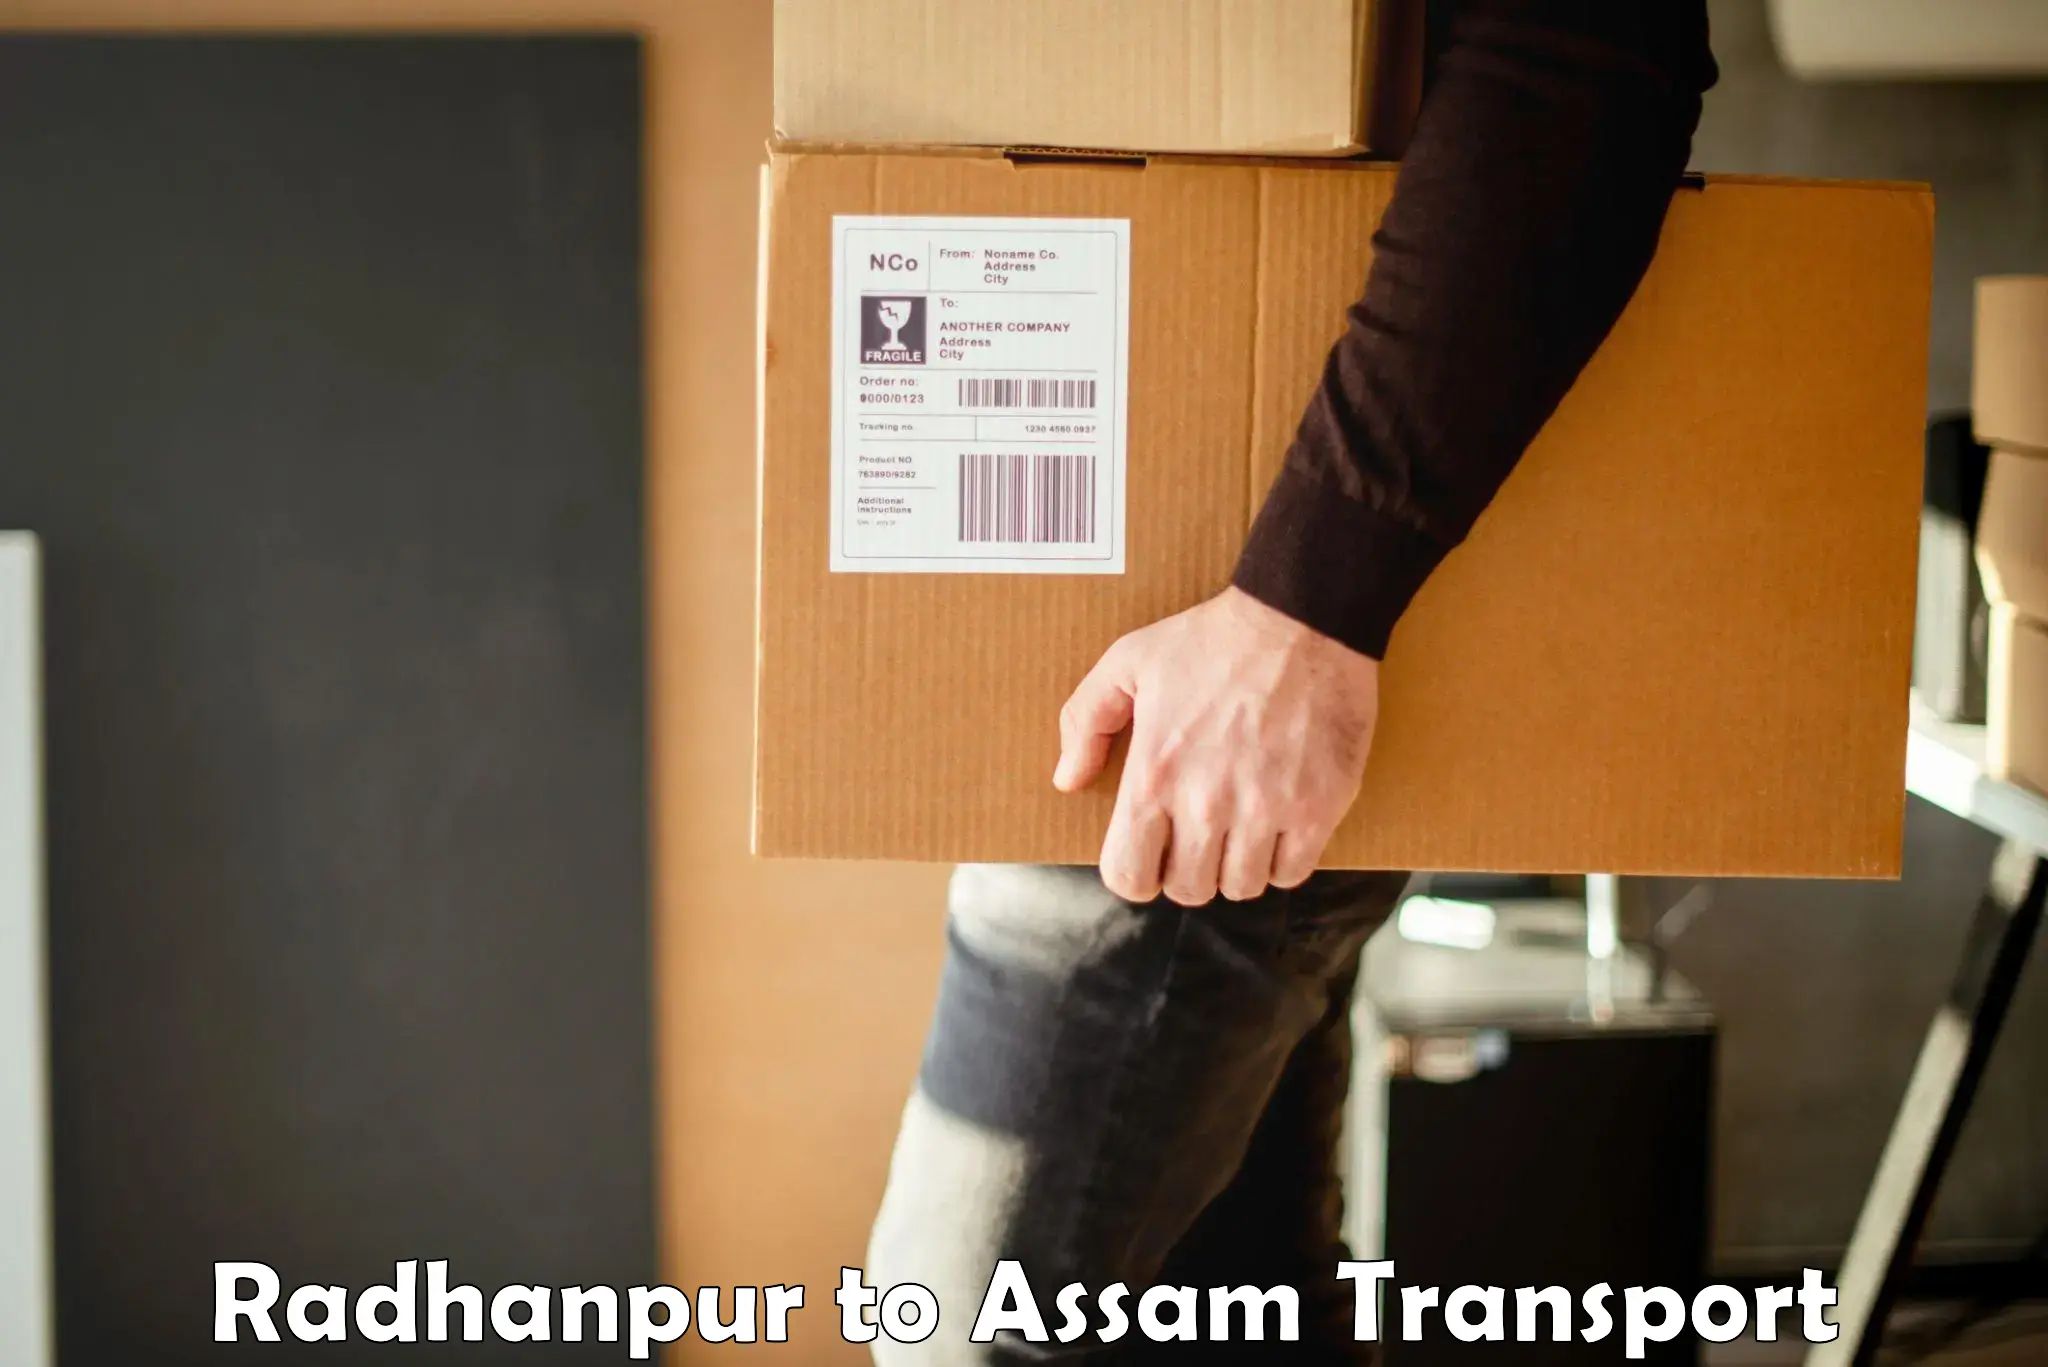 Daily parcel service transport Radhanpur to Thelamara